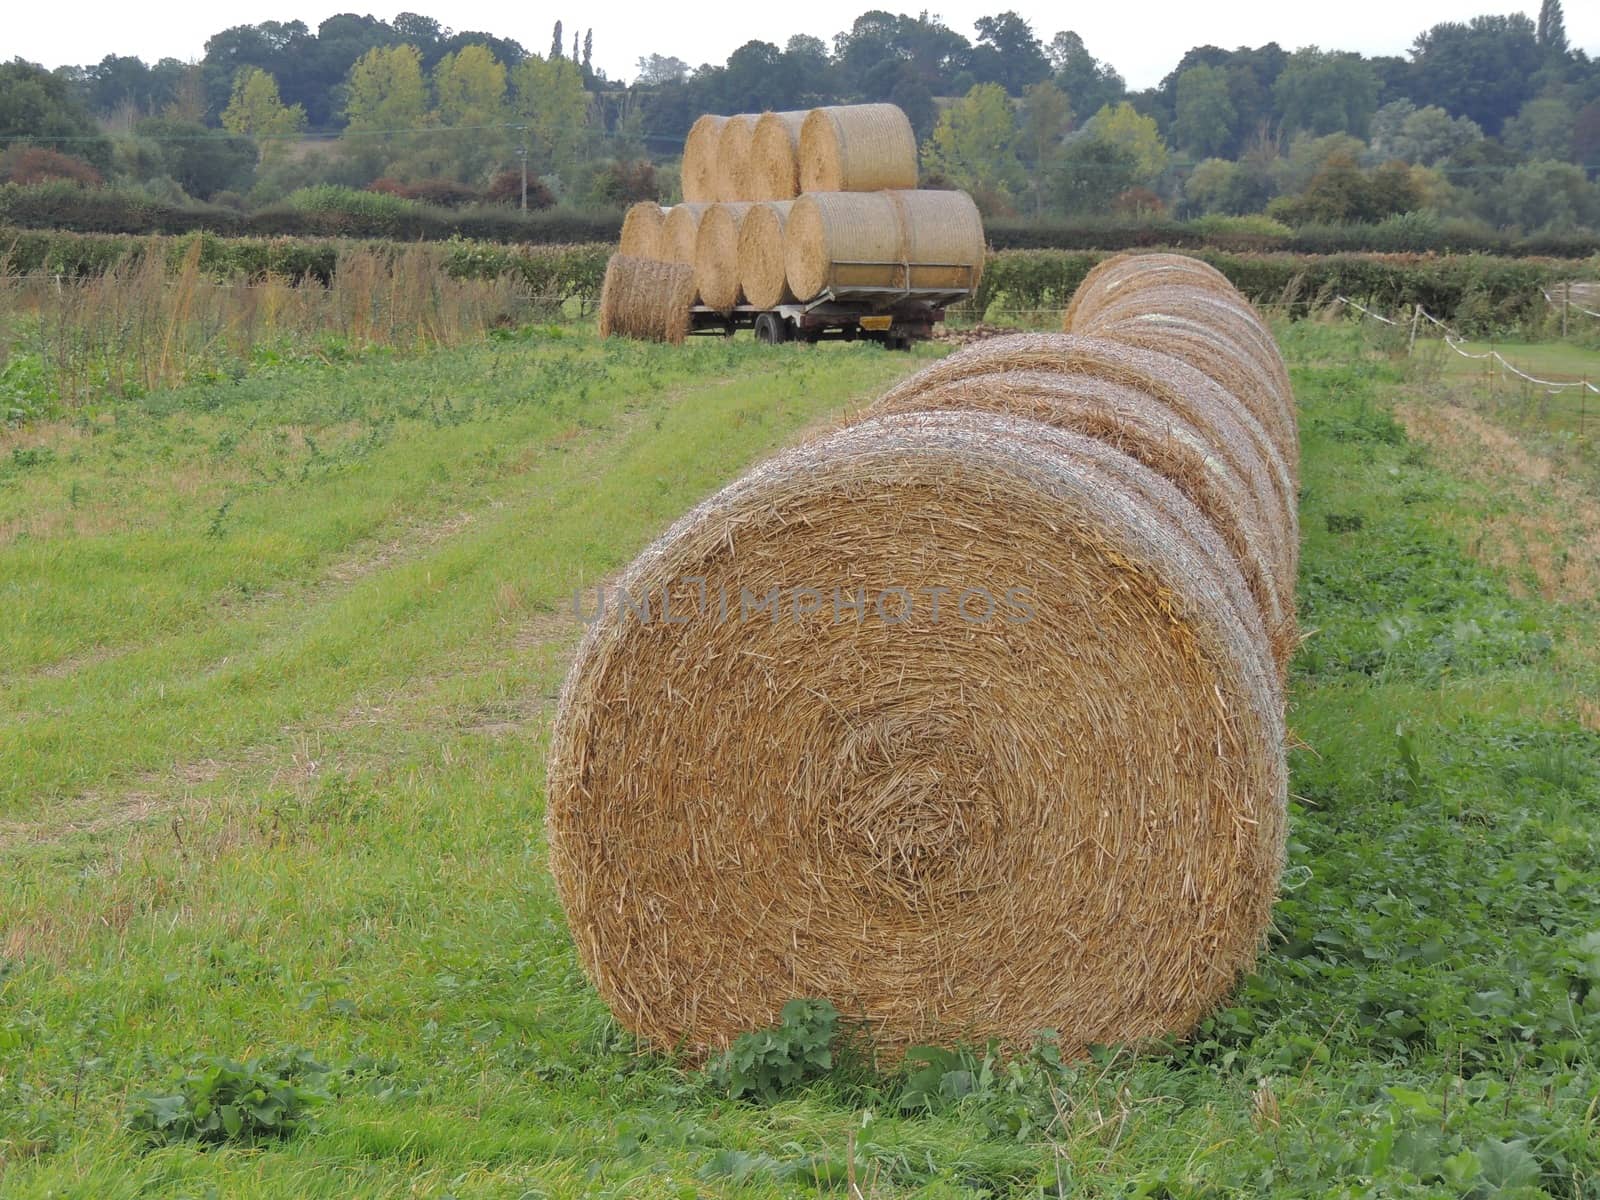 country farming scene of bales of Straw or hay